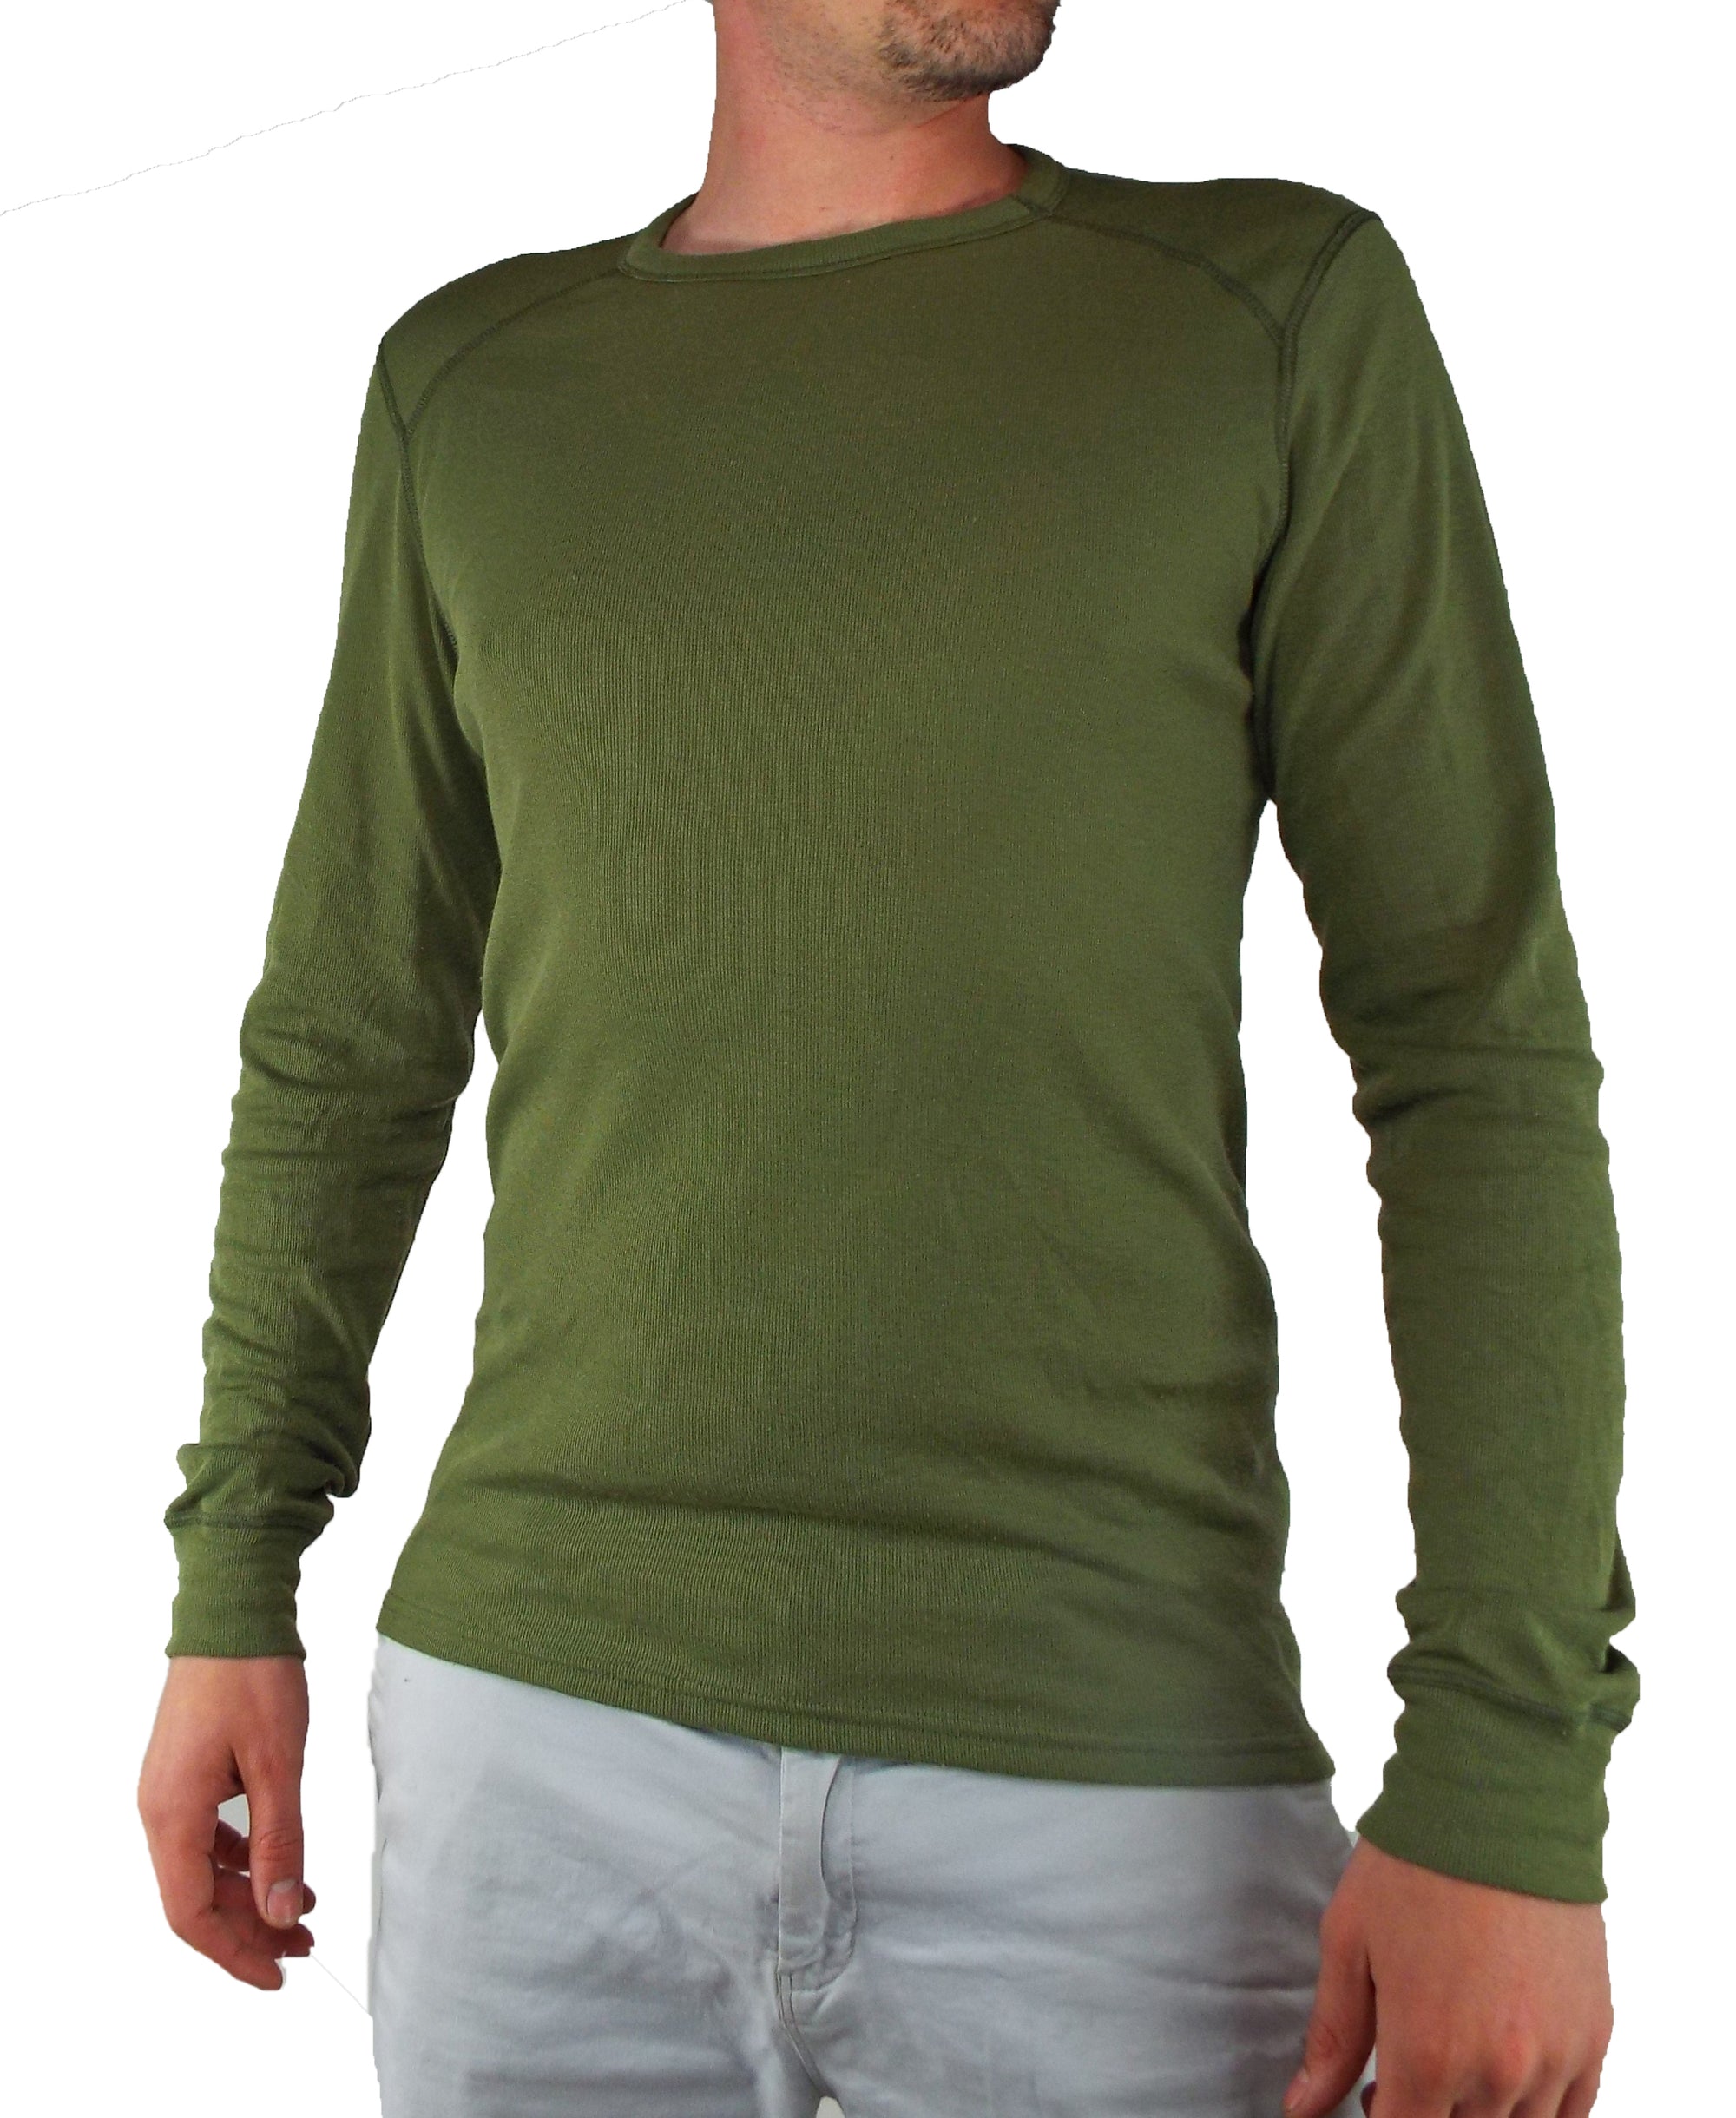 ODLO Dutch Army - Long Sleeve Thermal Crew Neck - Olive Green - Grade 1